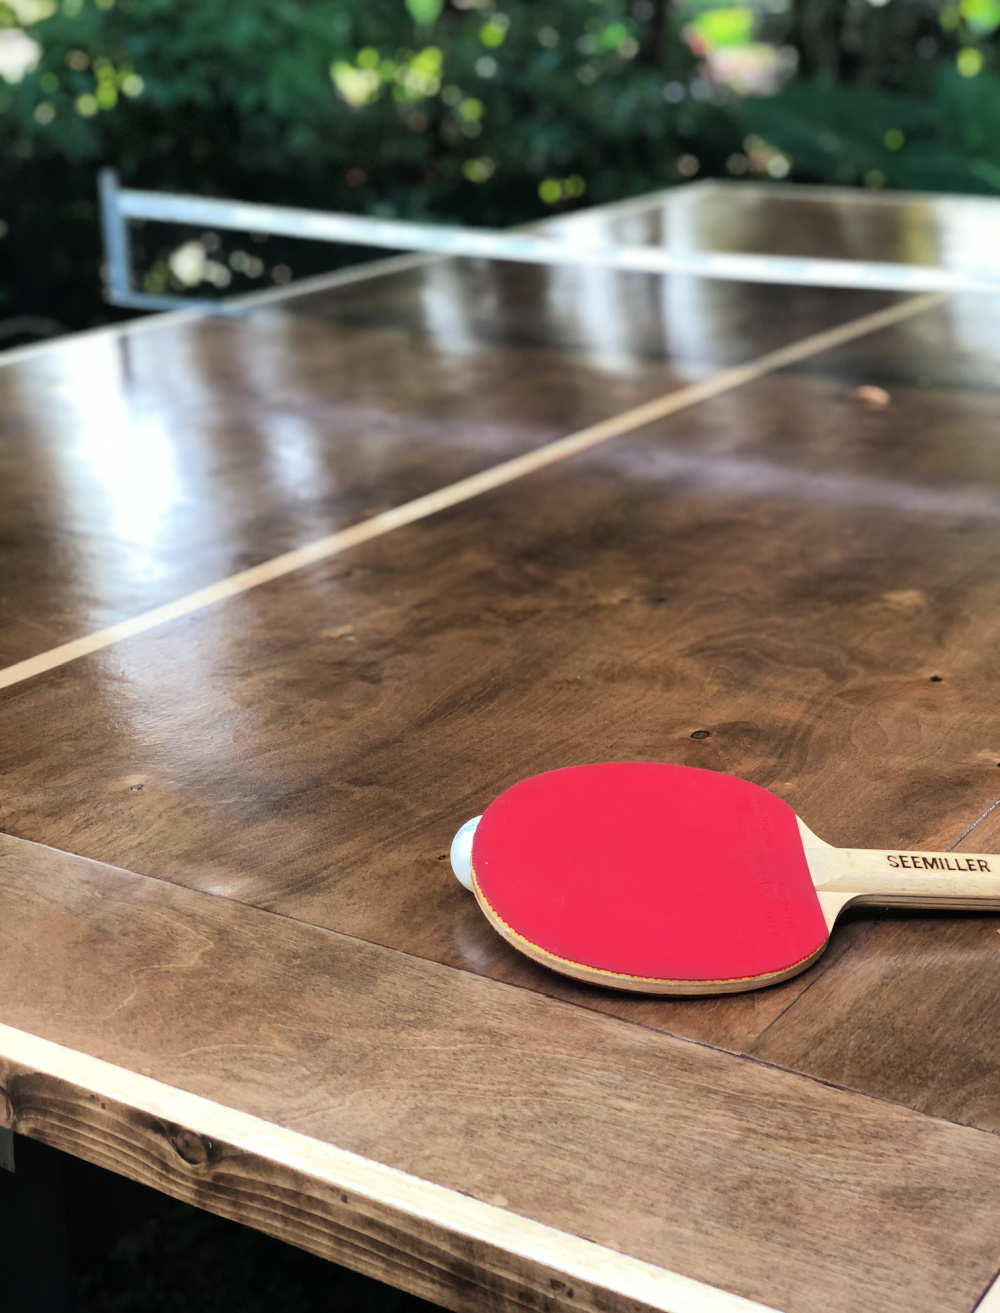 Diy Exterior Ping Pong Table Mimzy, Plans For Outdoor Ping Pong Table